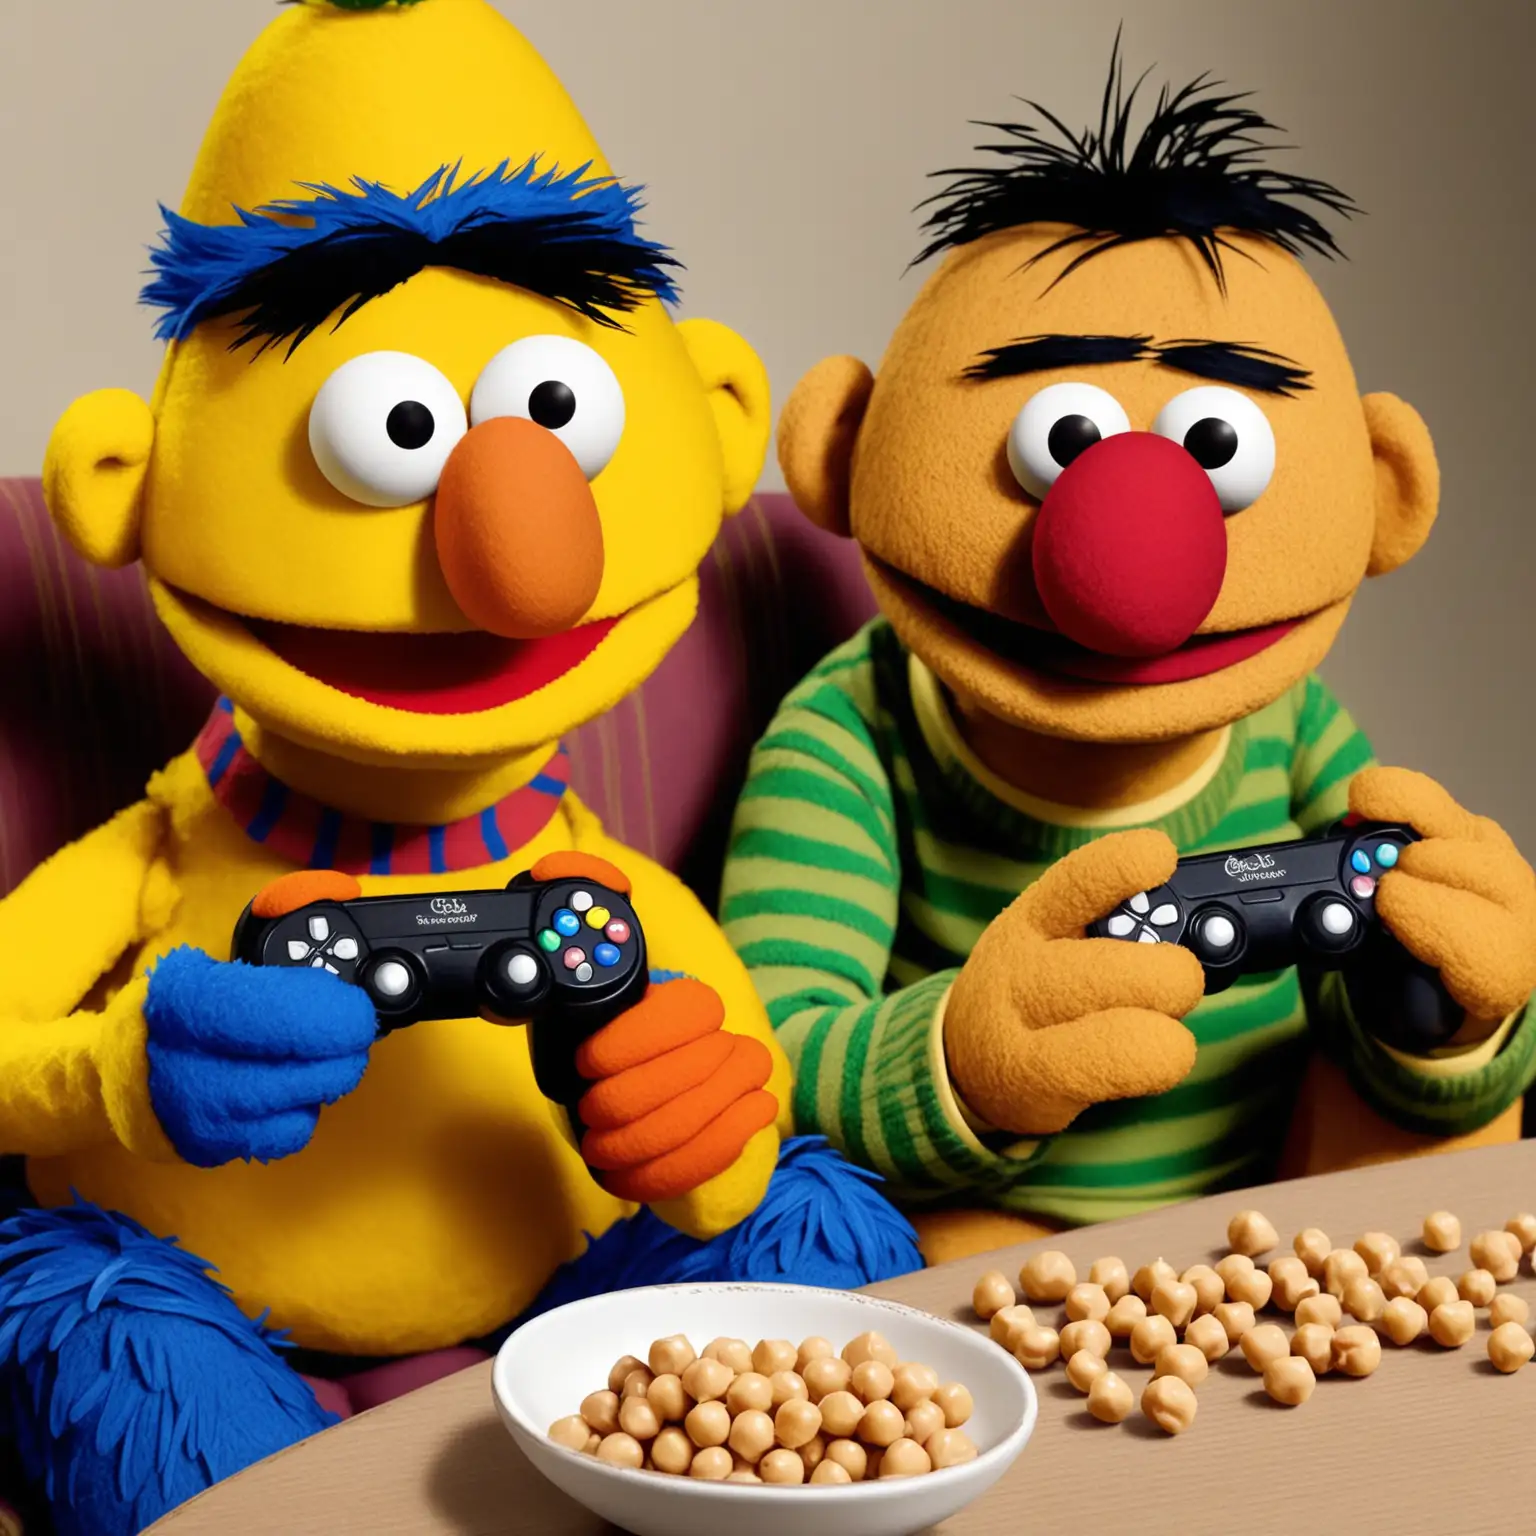 Bert and Ernie from sesame street, plating video games and eating chickpeas 